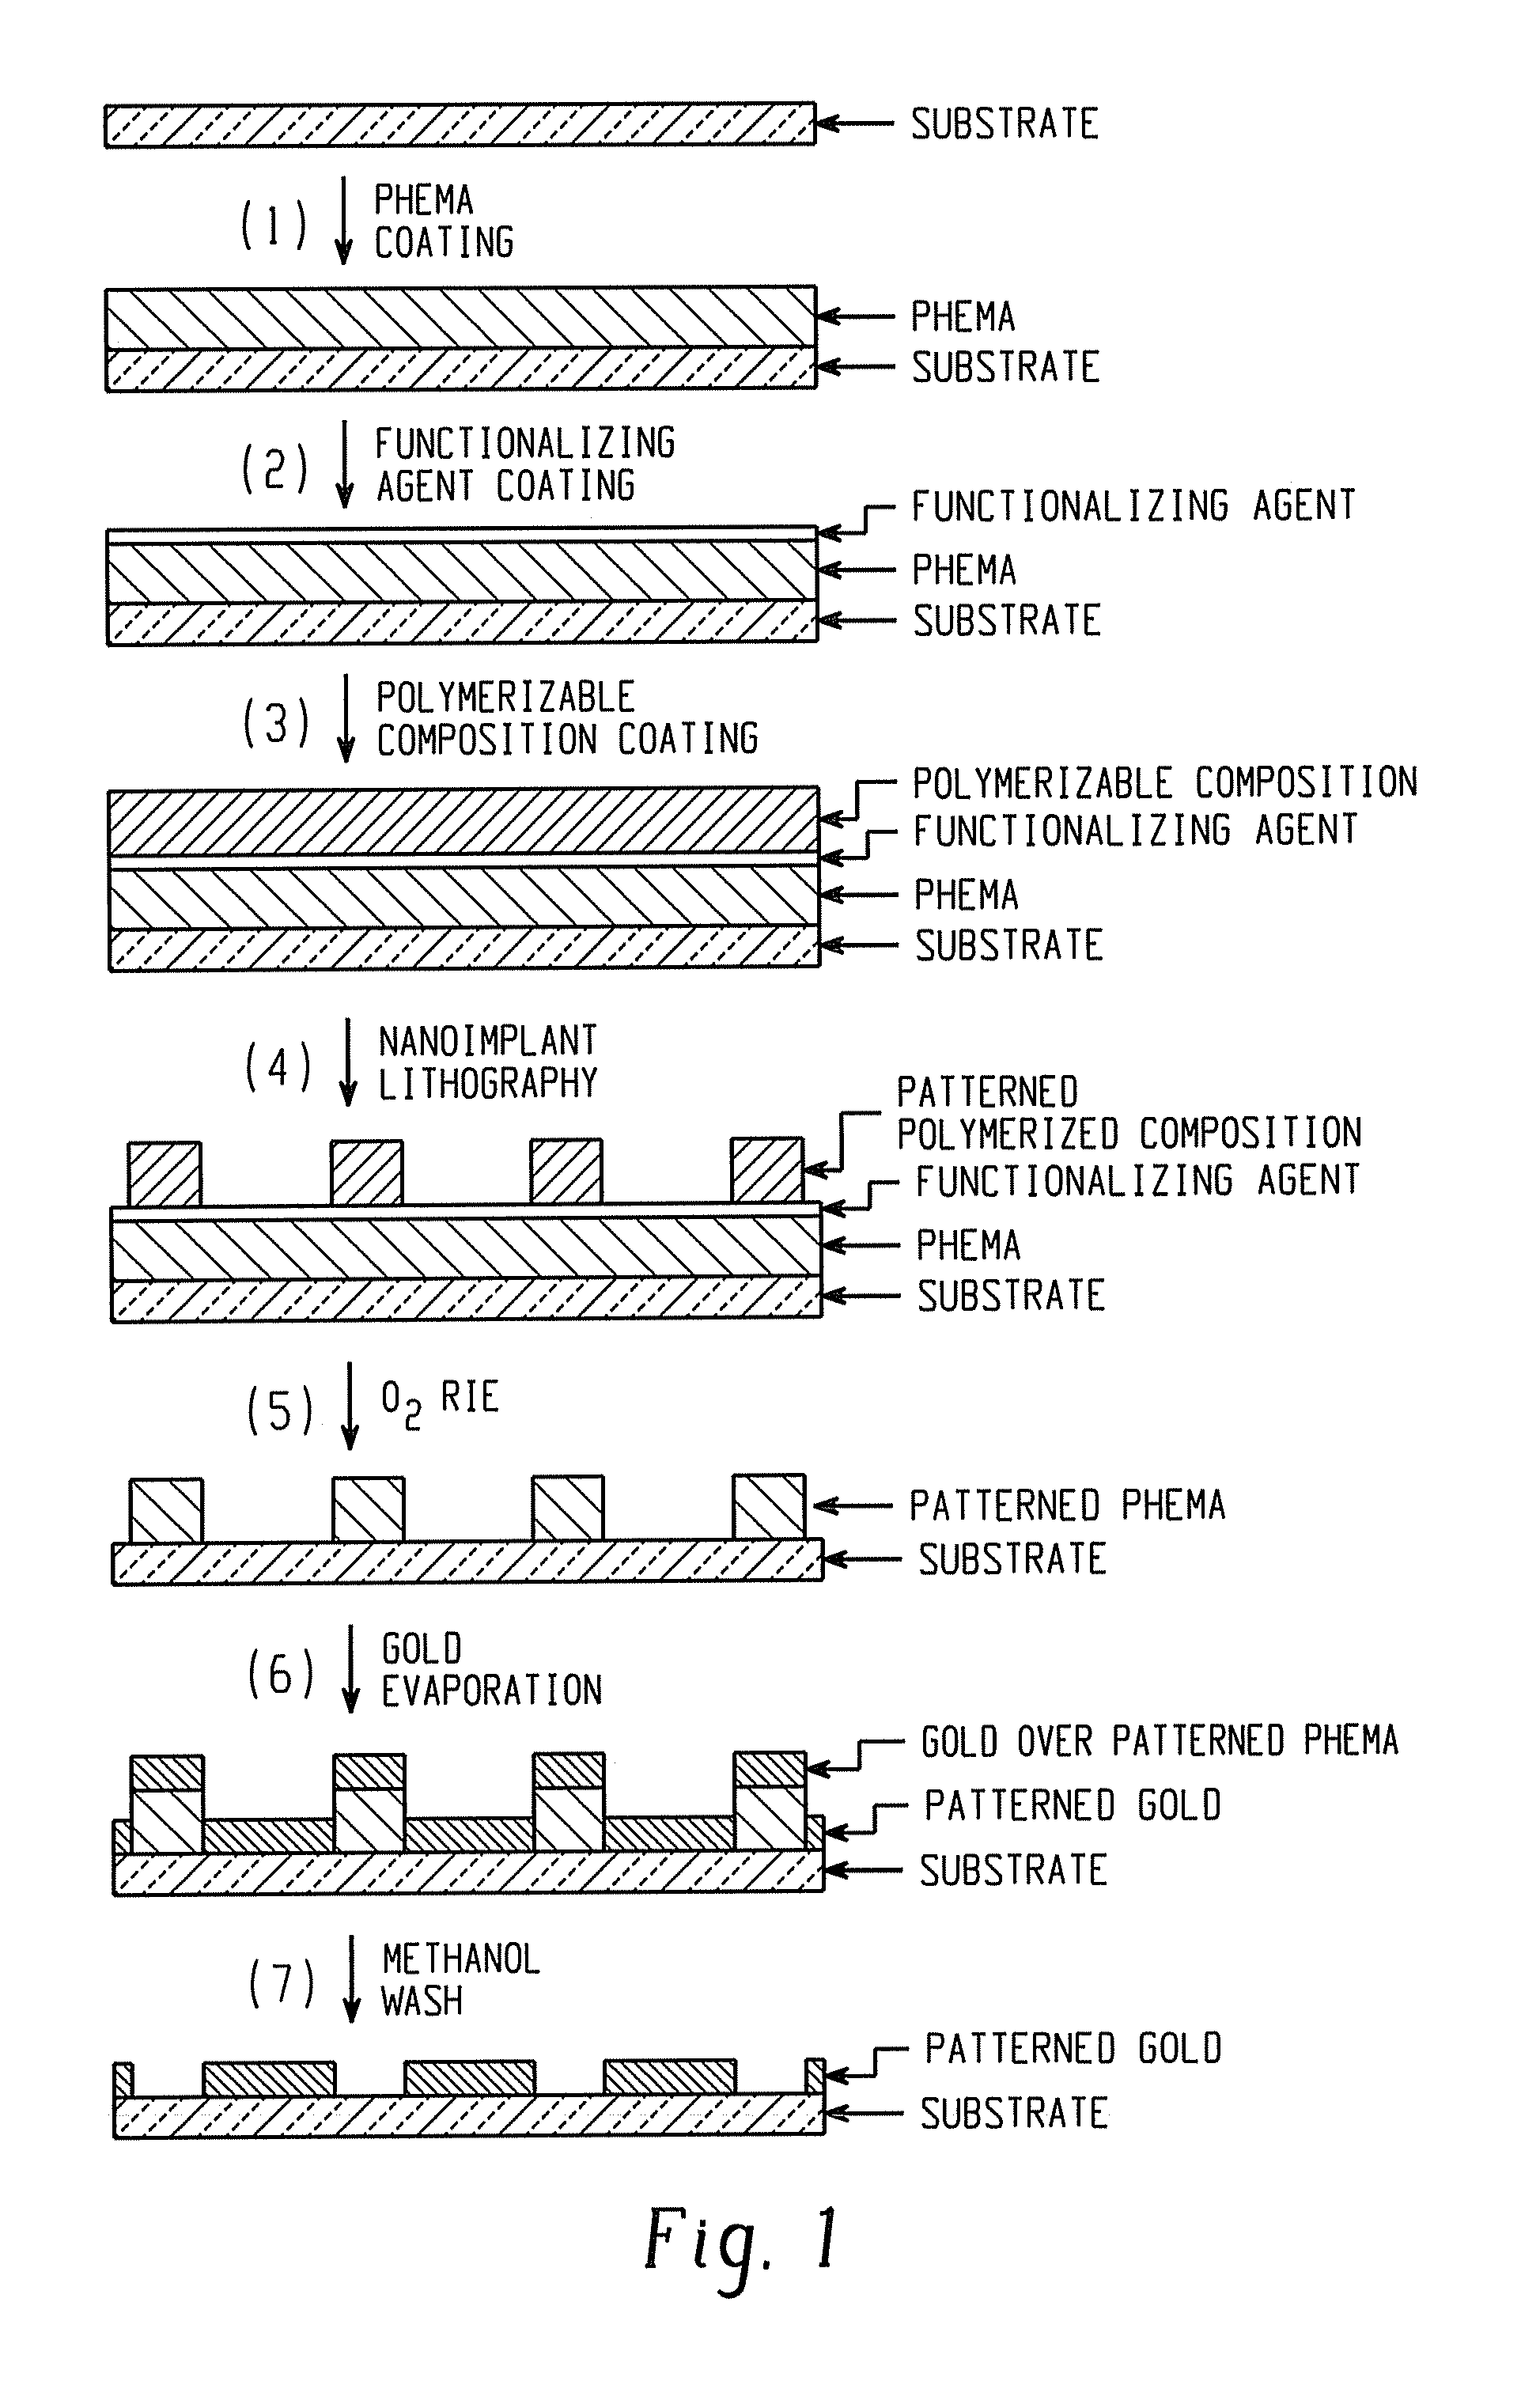 Article with phema lift-off layer and method therefor